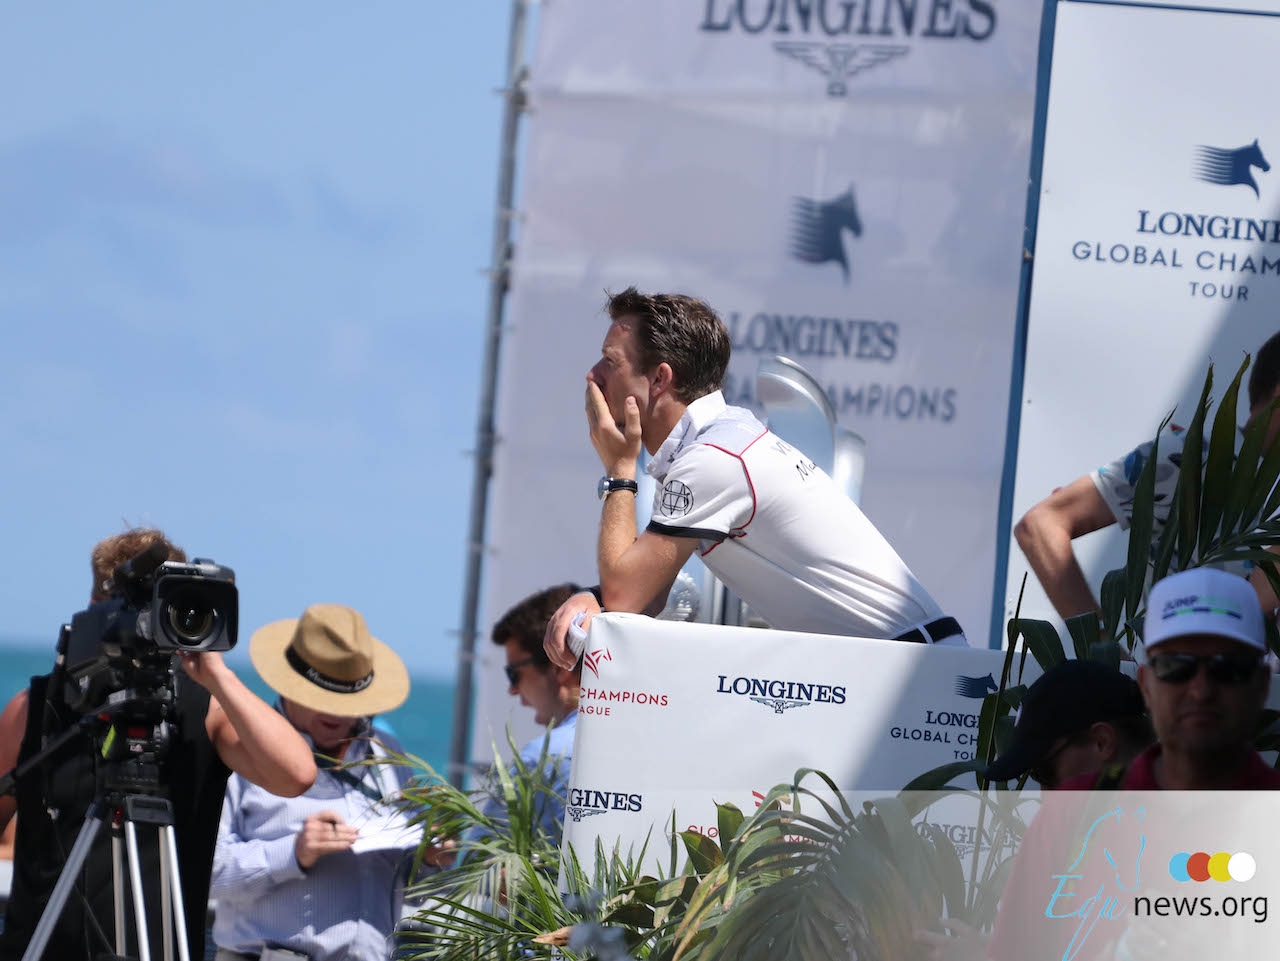 Change of Schedule for LGCT Miami